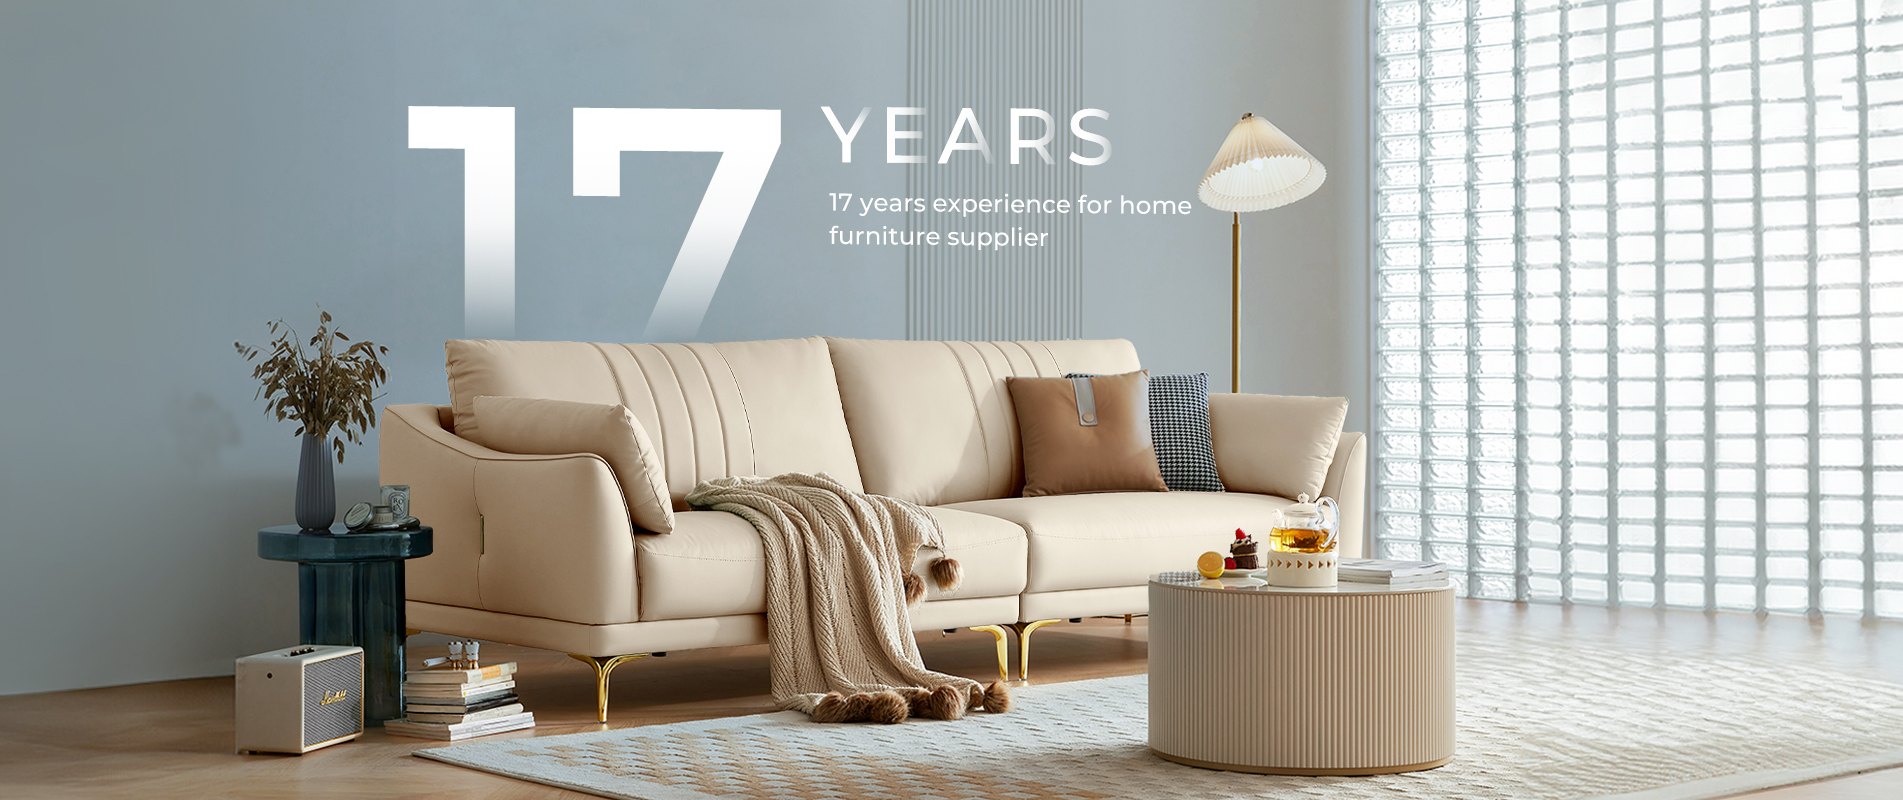 17 years furniture experience